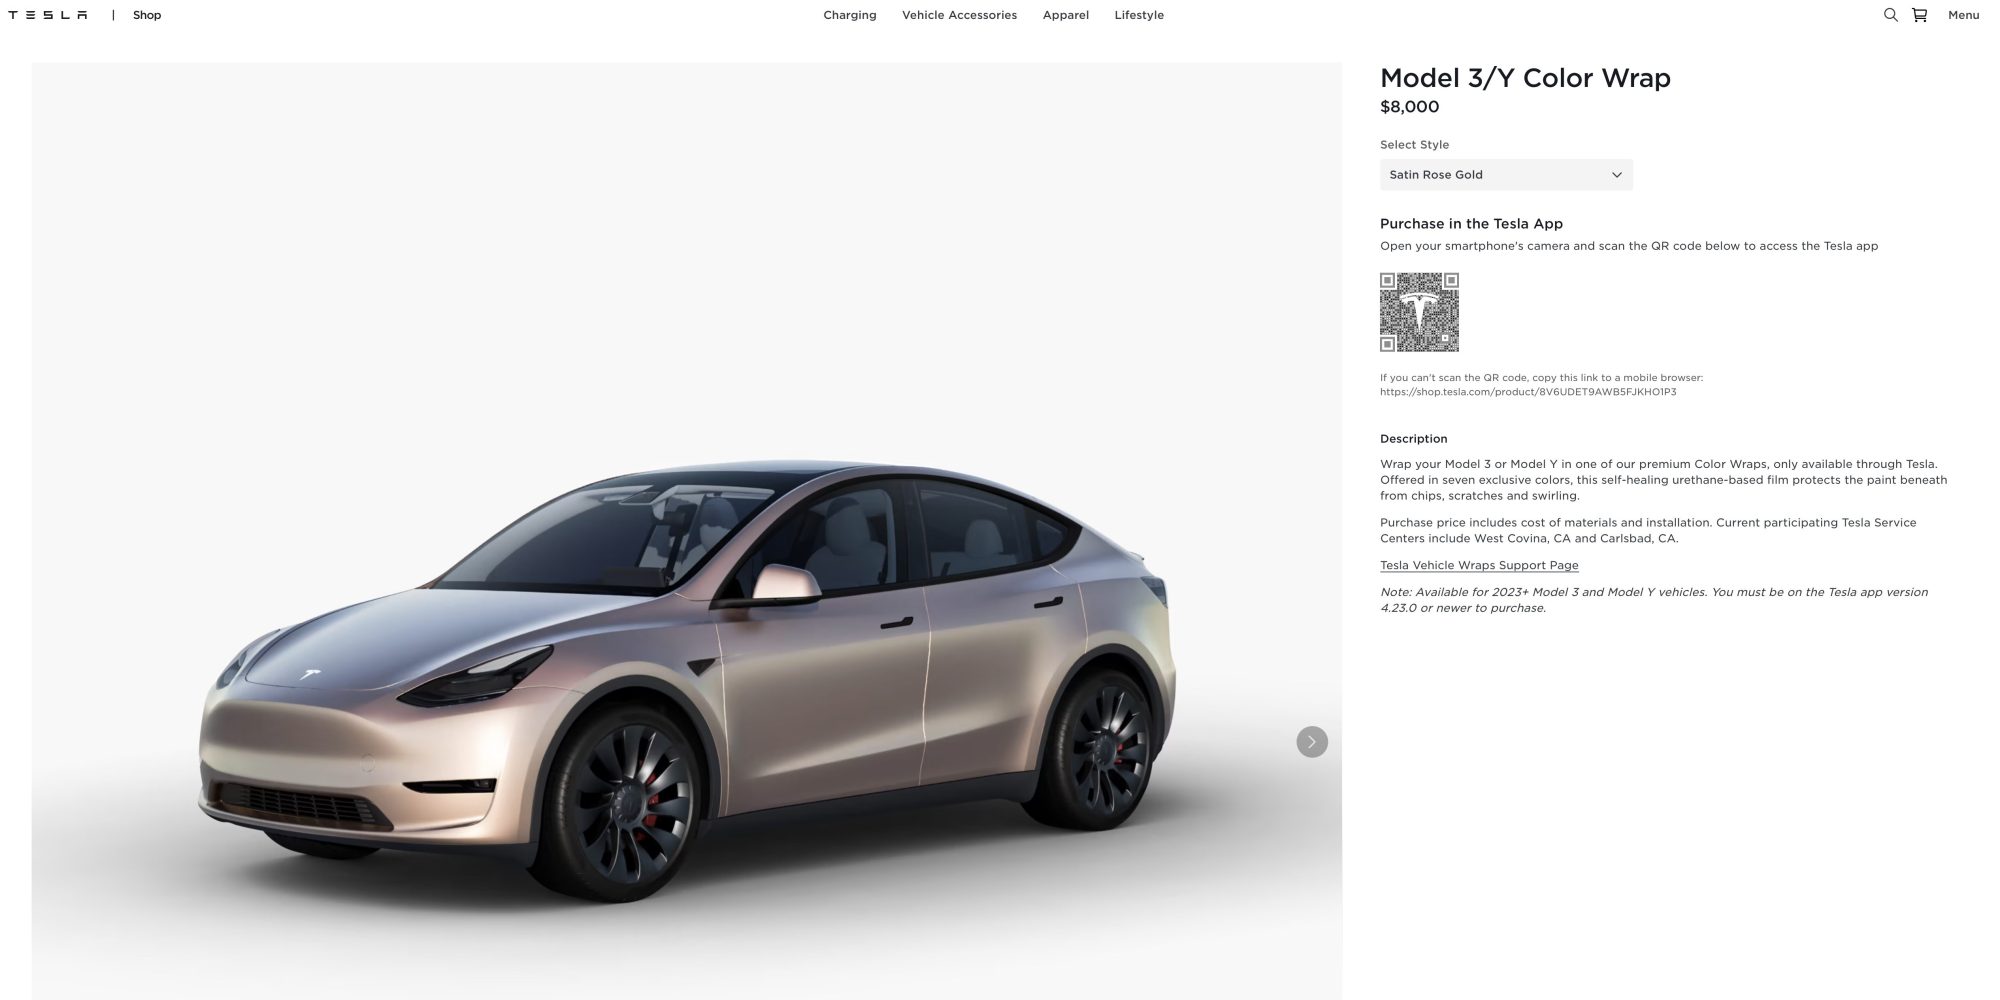 Tesla starts selling vehicle wraps for Model 3/Y at a pricey $7.5K